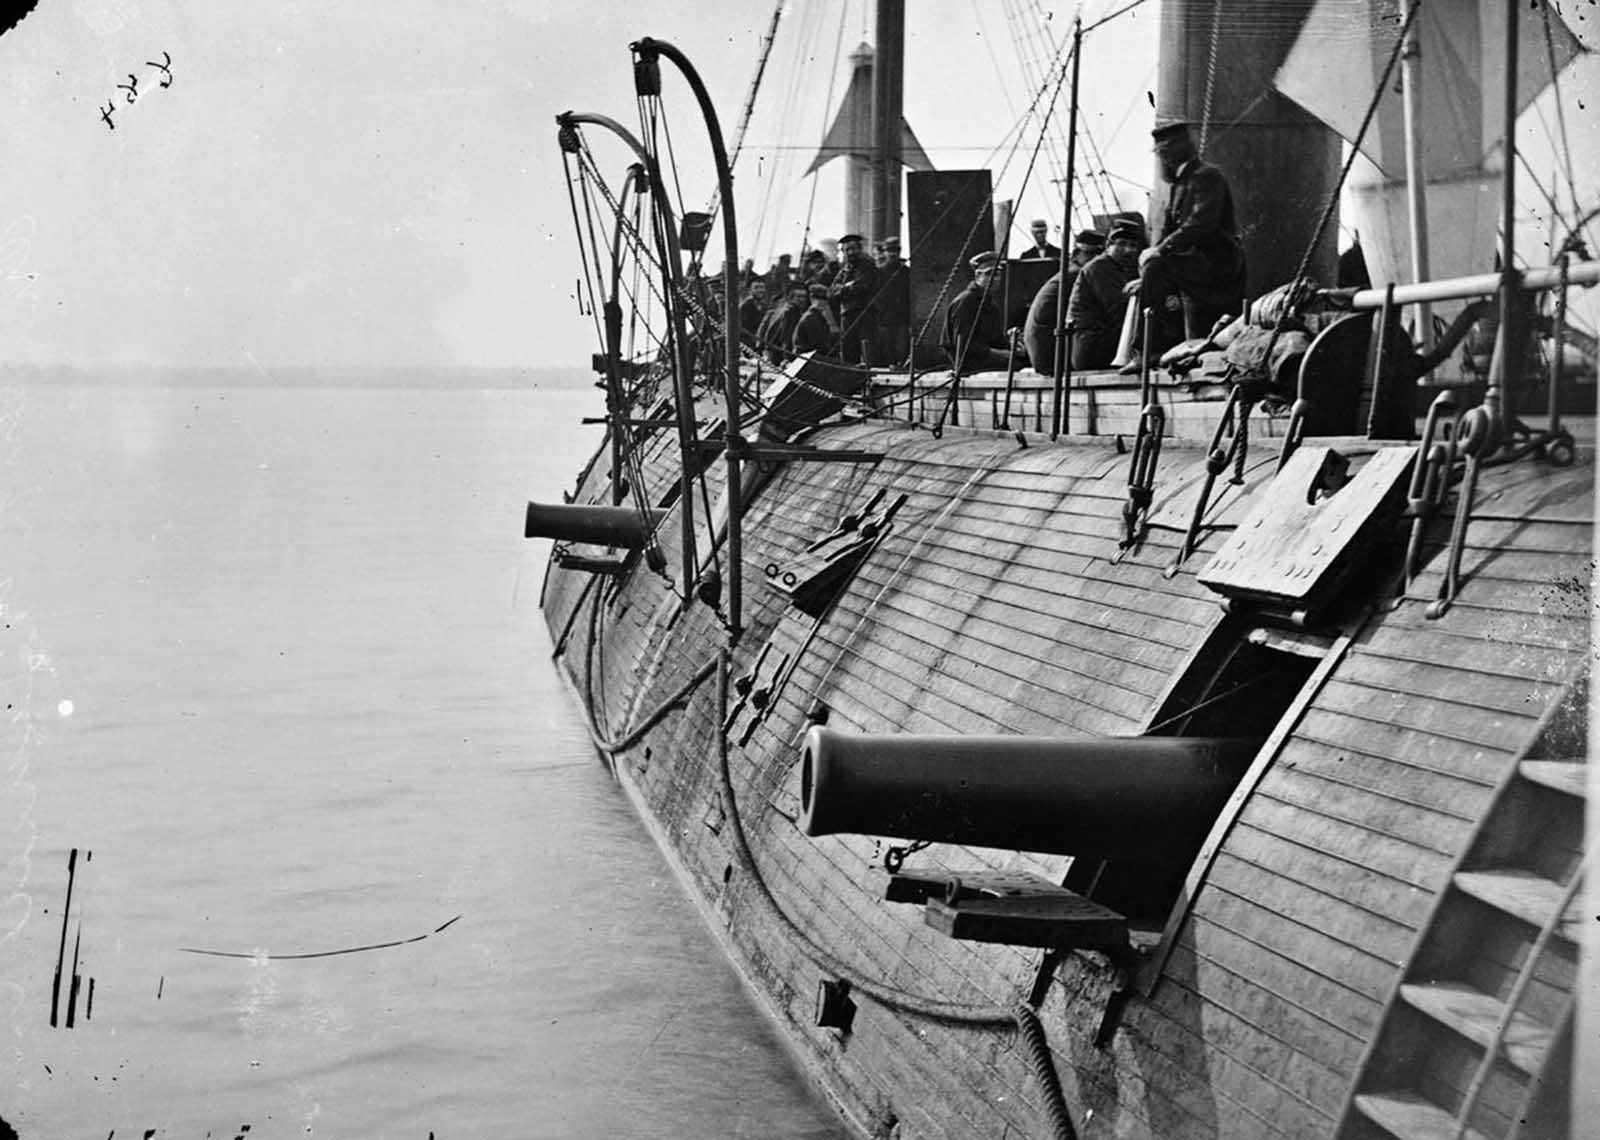 The Federal Ironclad Galena, after recent action with Confederate batteries at Drewry's Bluff, on Virginia's James River, ca. 1862.